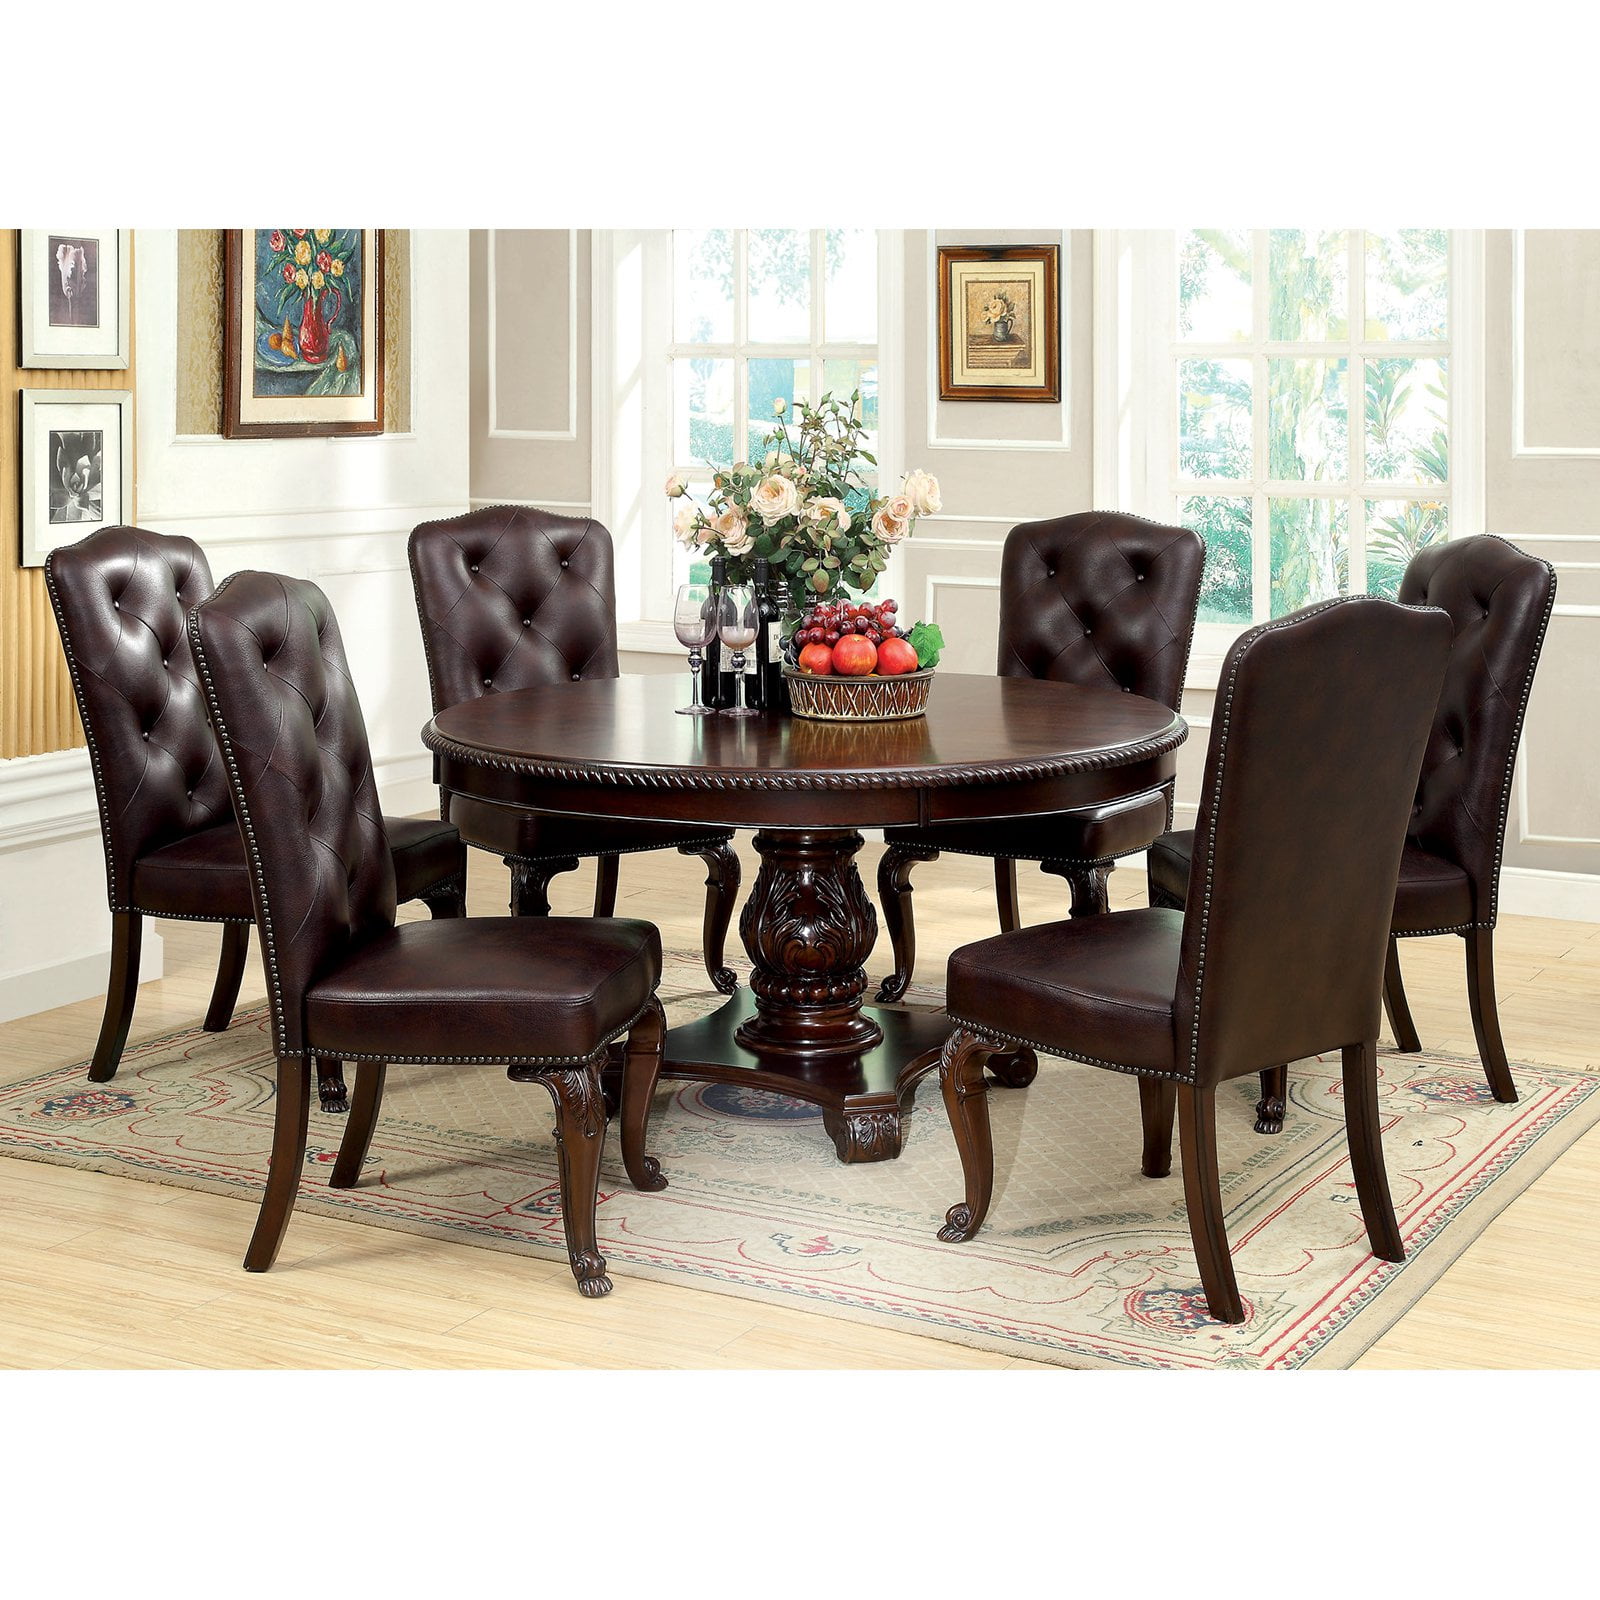 Berkshire 7 Piece Round Dining Set, Round Dining Room Table With Leather Chairs